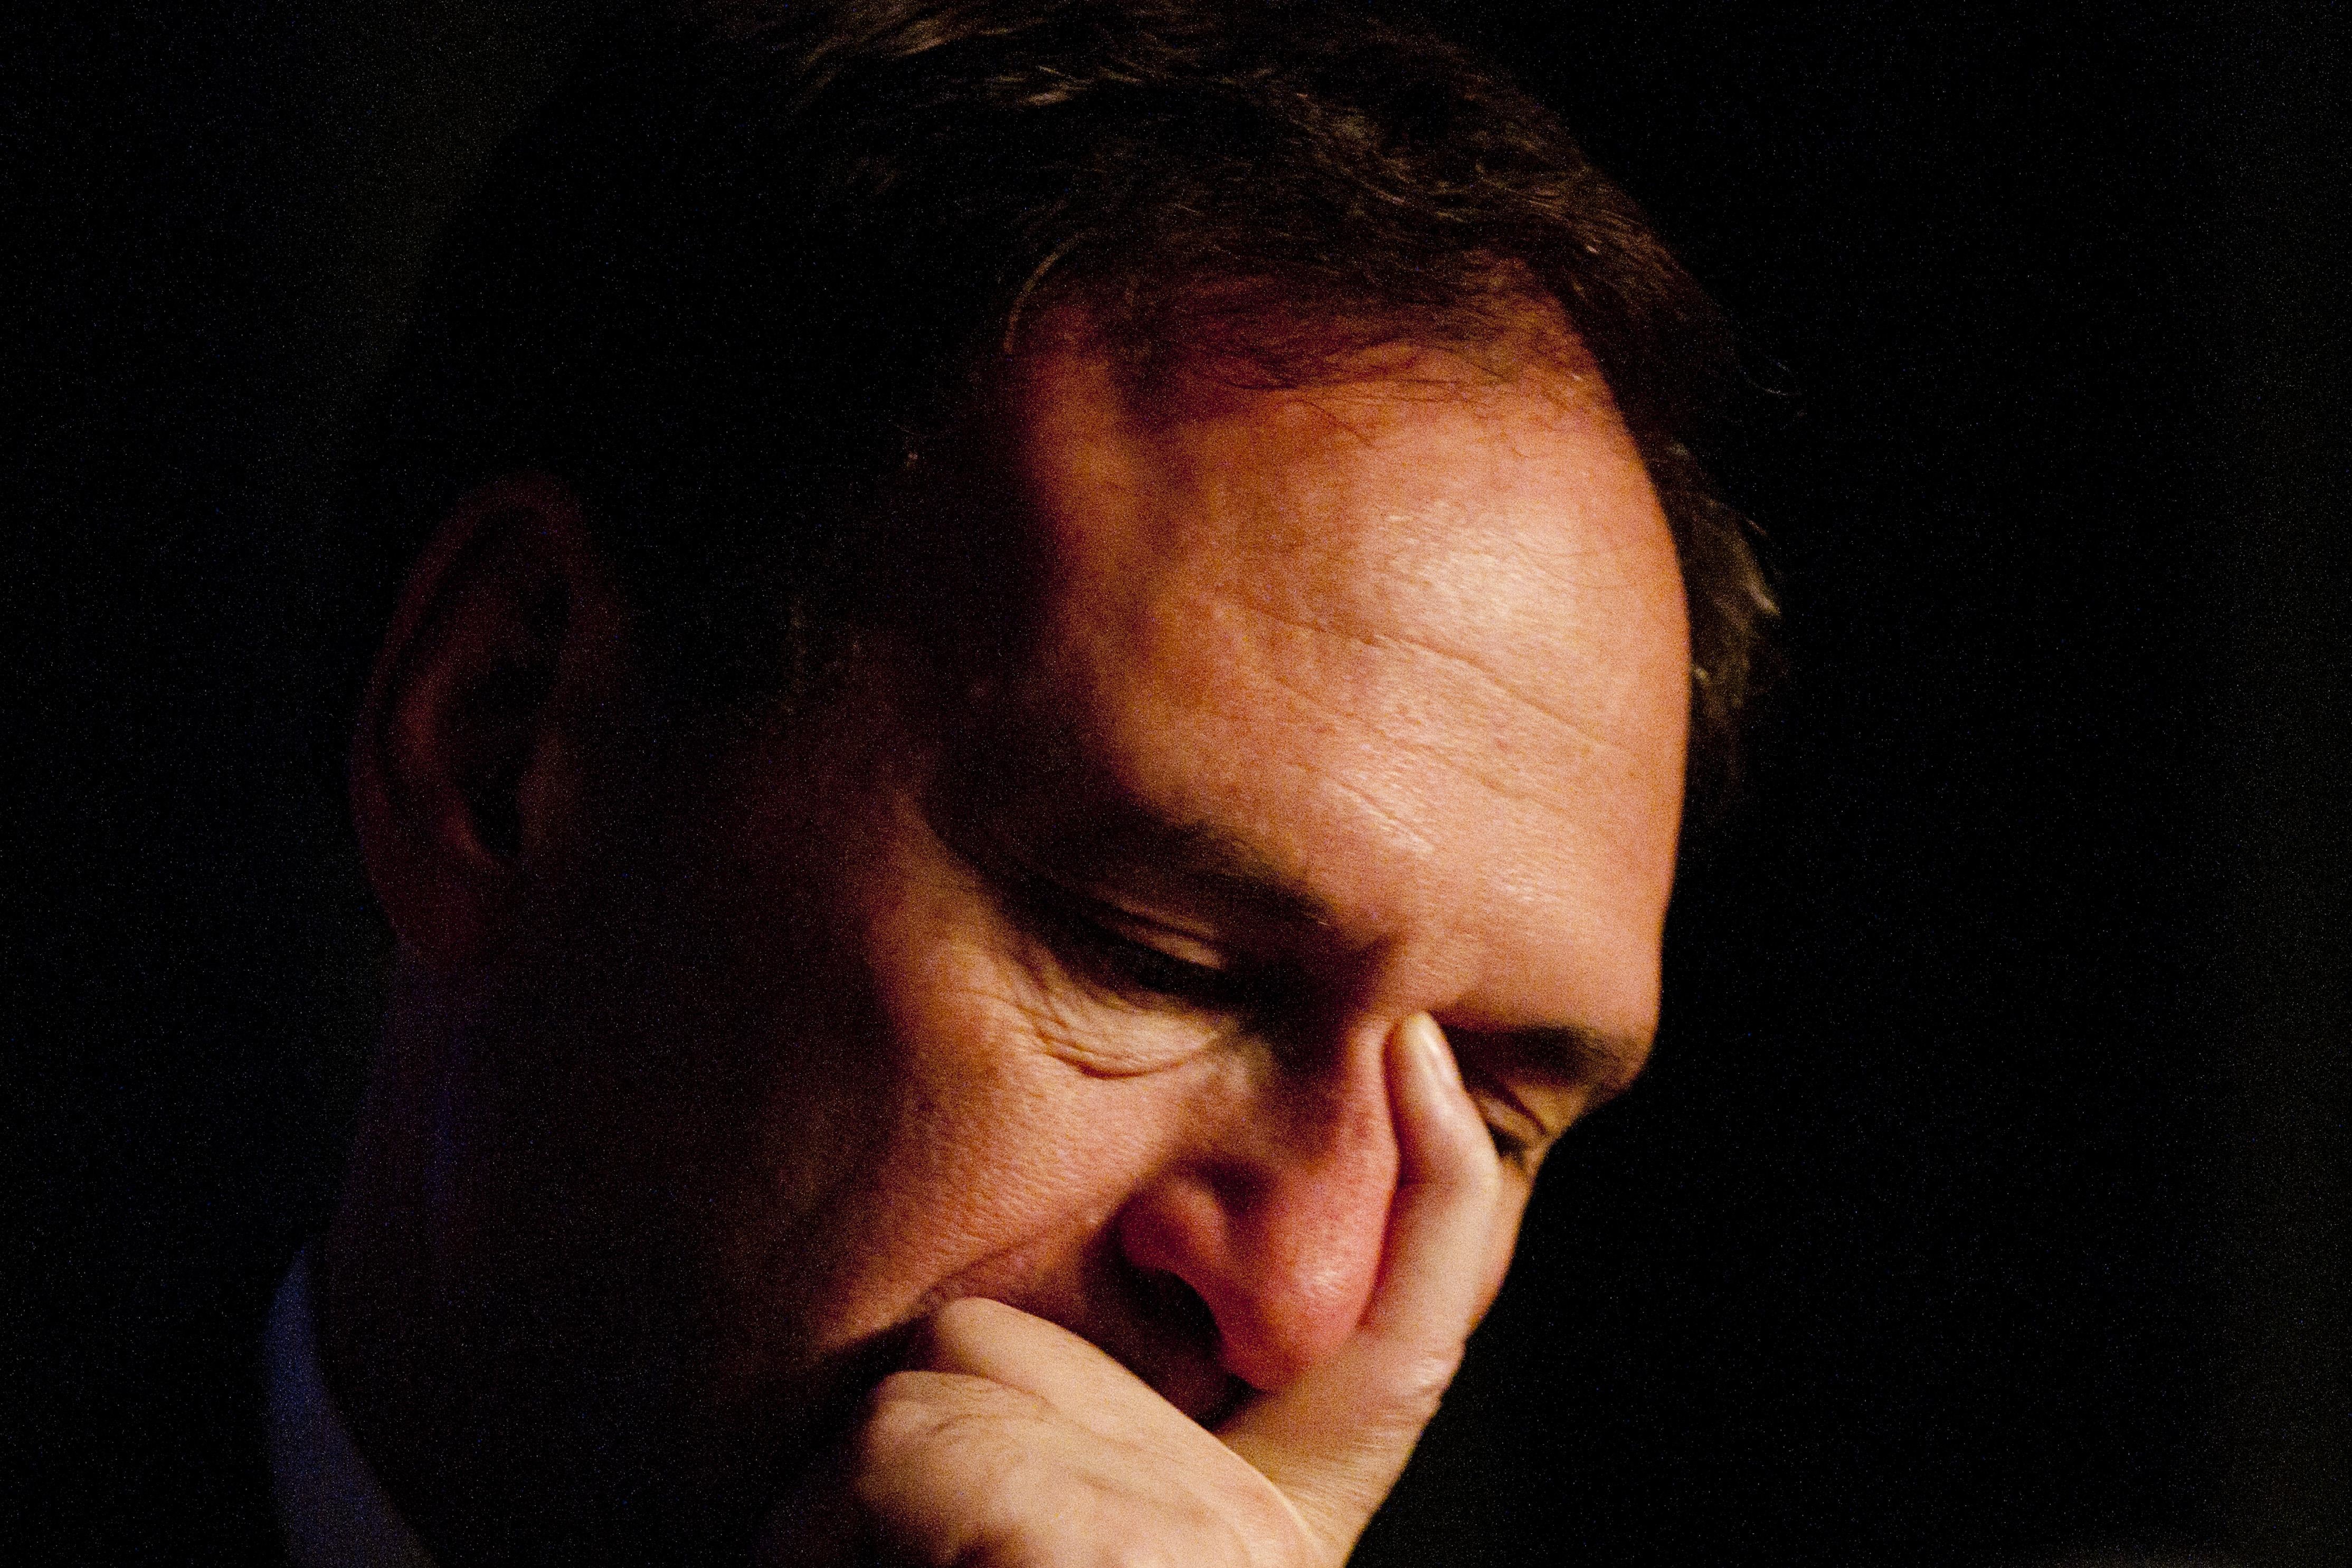 Close-up of Alito holding his face in his hand with eyes downcast